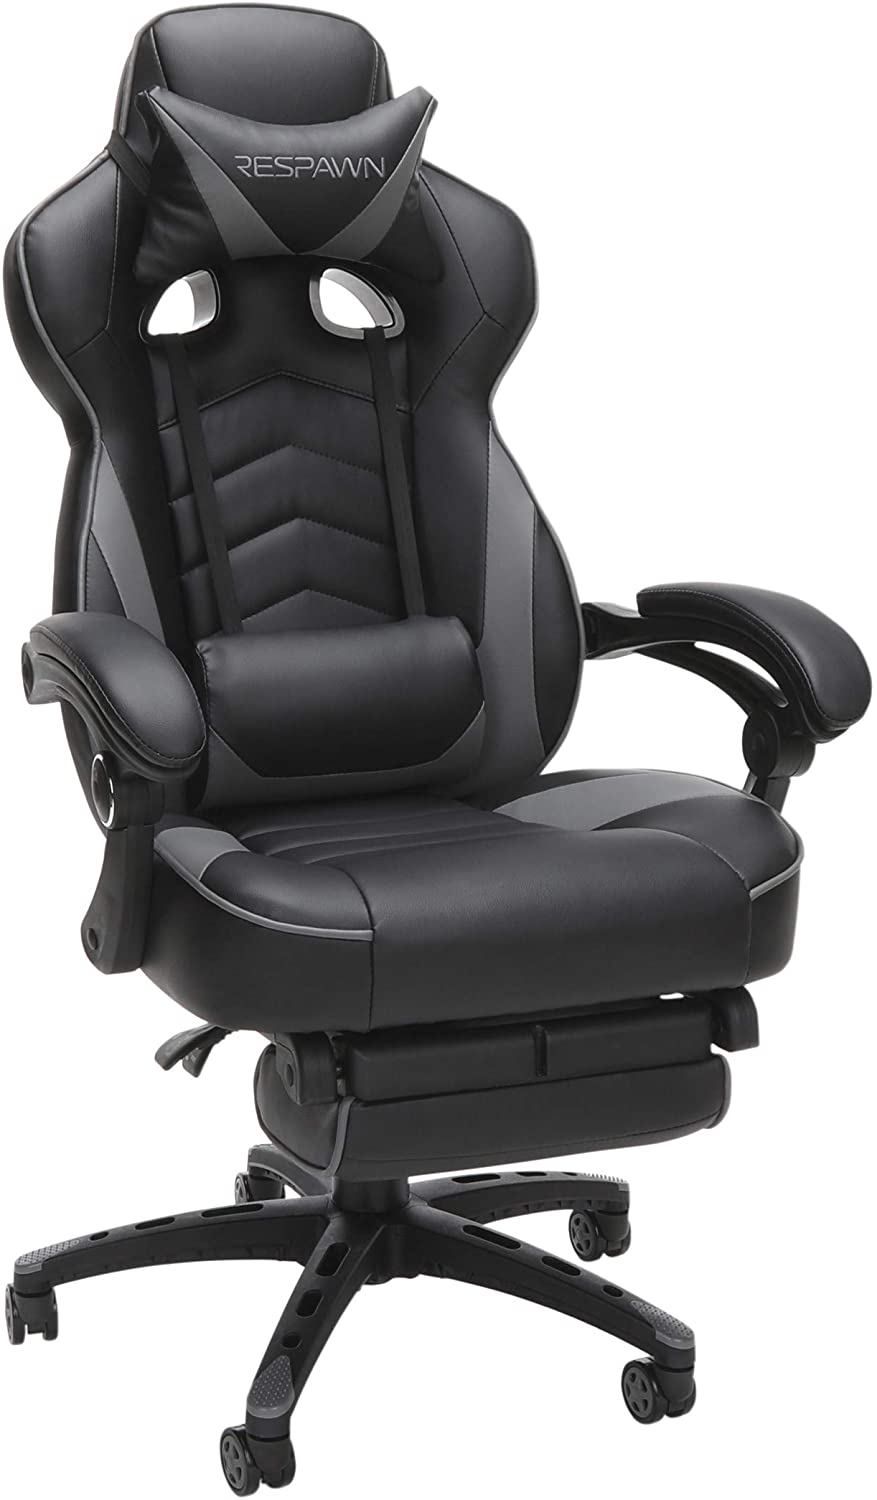 RESPAWN 110 Gaming Chair, Gray